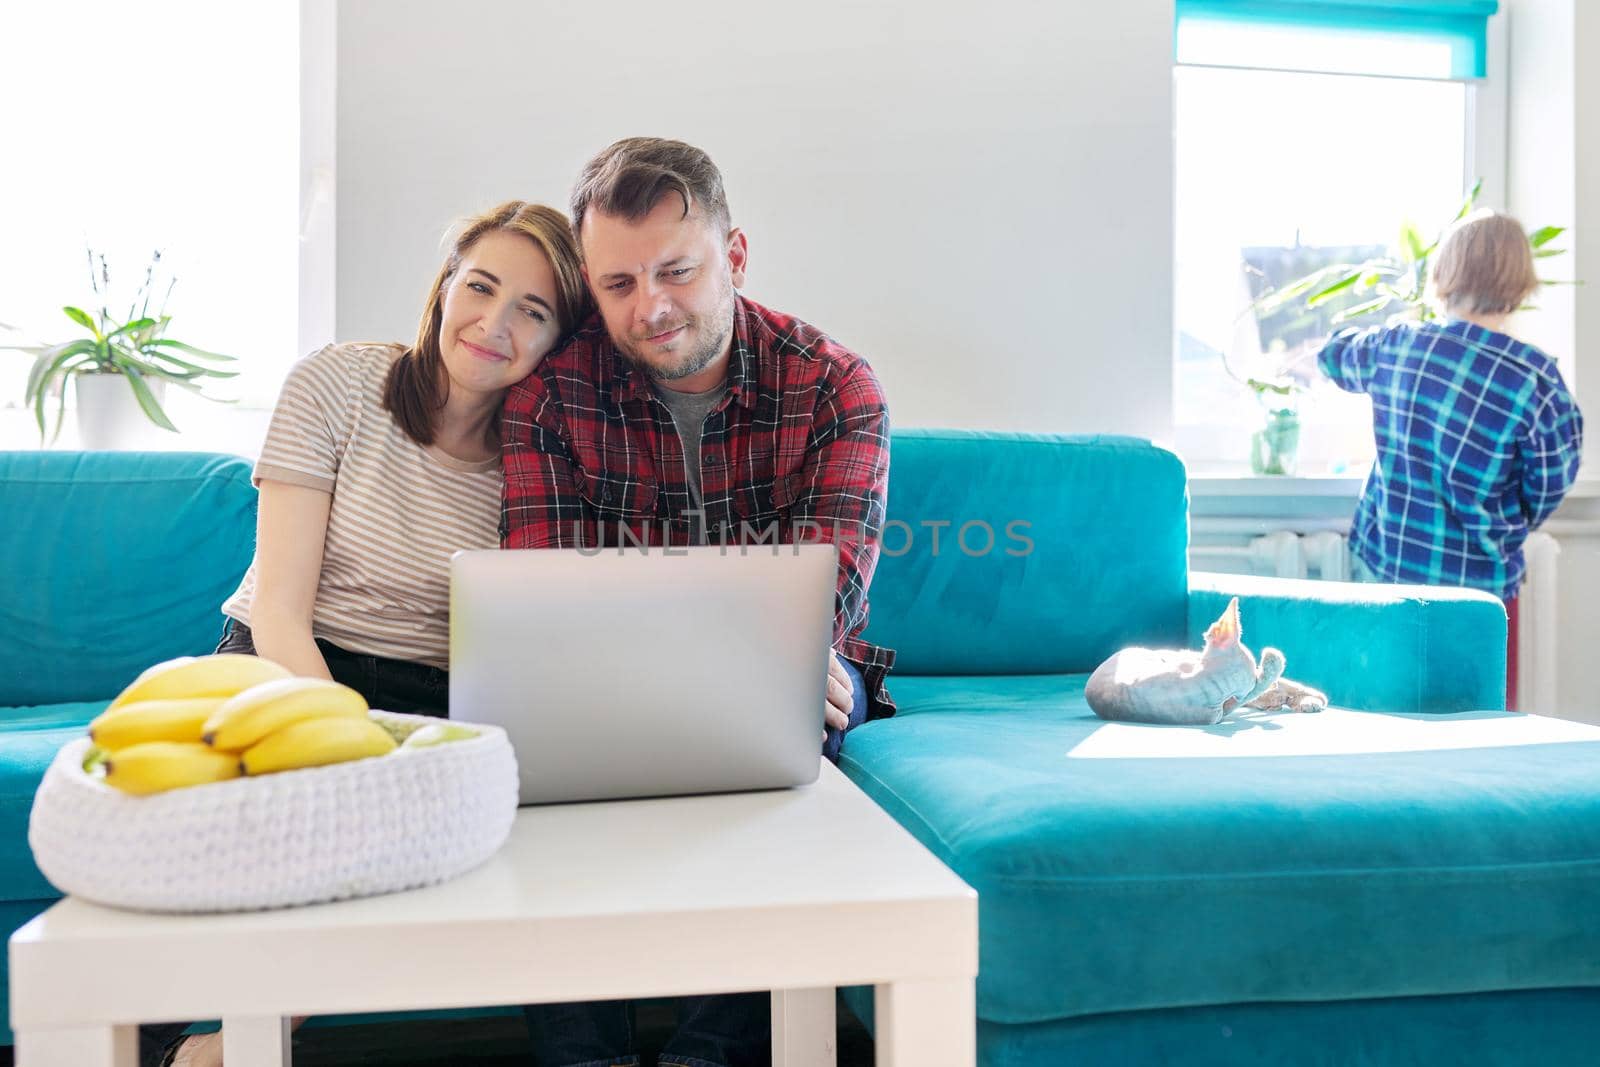 Smiling laughing positive couple 40 years old, husband and wife looking at laptop monitor sitting together at home on sofa in living room, child son near the window, real people life